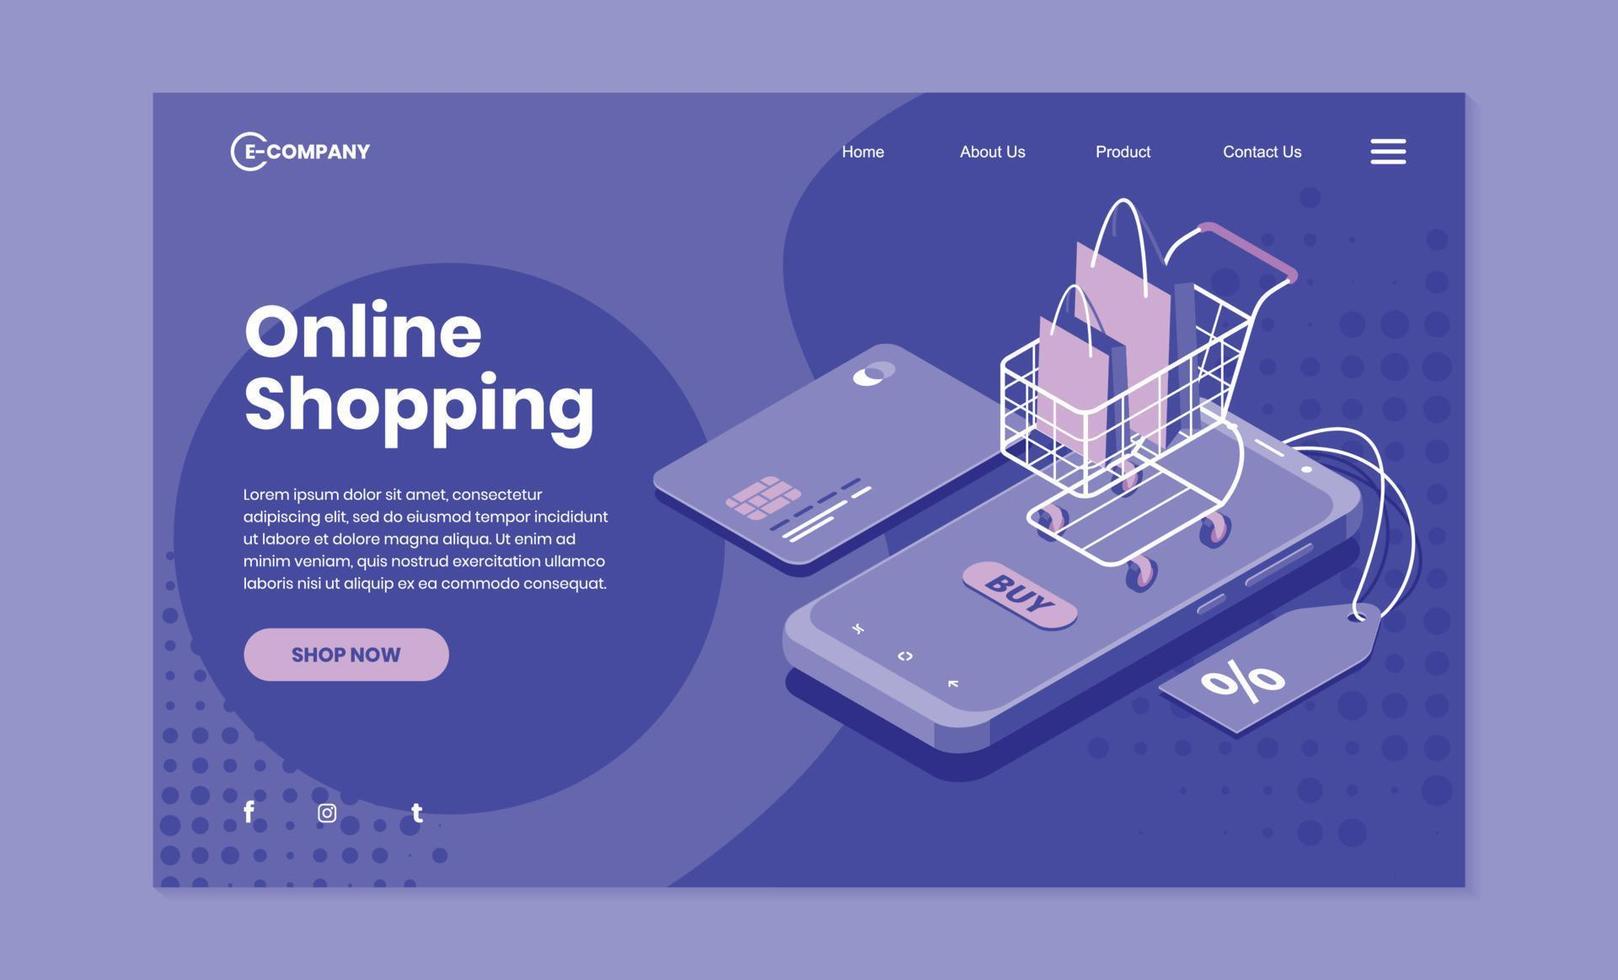 Online Shopping Store Landing Page Template vector